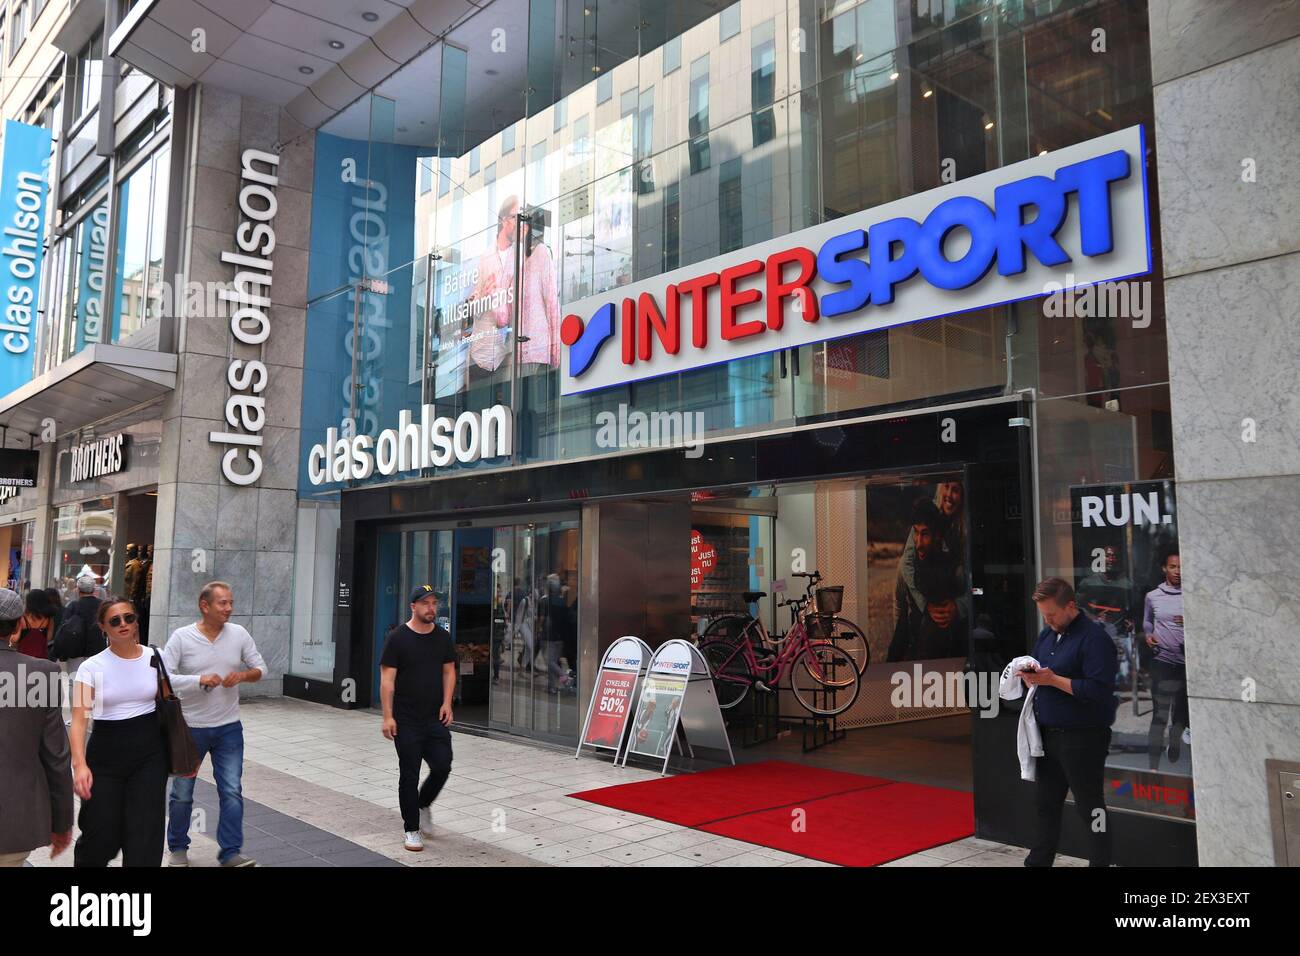 STOCKHOLM, SWEDEN - AUGUST 23, 2018: People walk by Intersport sportswear  store in Stockholm, Sweden. Intersport has over 5,000 locations worldwide  Stock Photo - Alamy